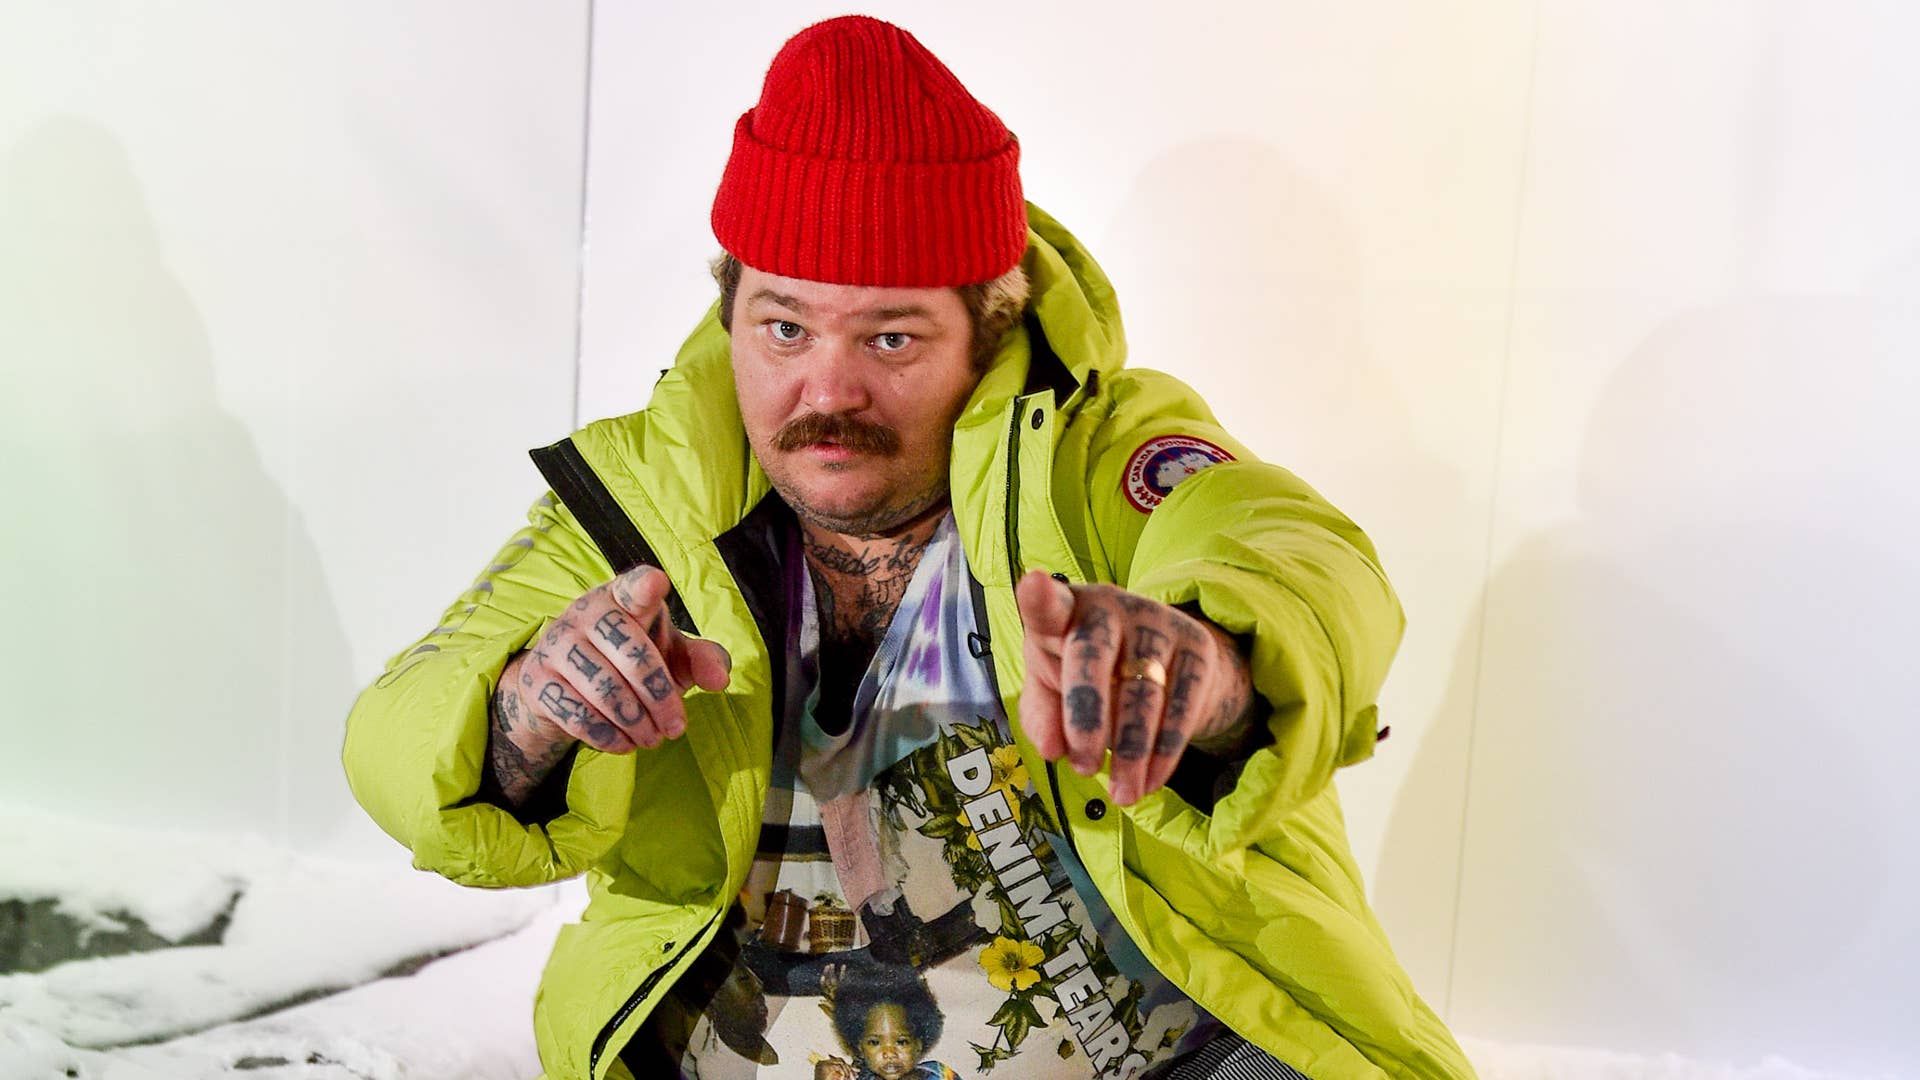 Matty Matheson wearing a read touque, a lime green Canada Goose jacket, and a graphic tee, pointing at the camera.